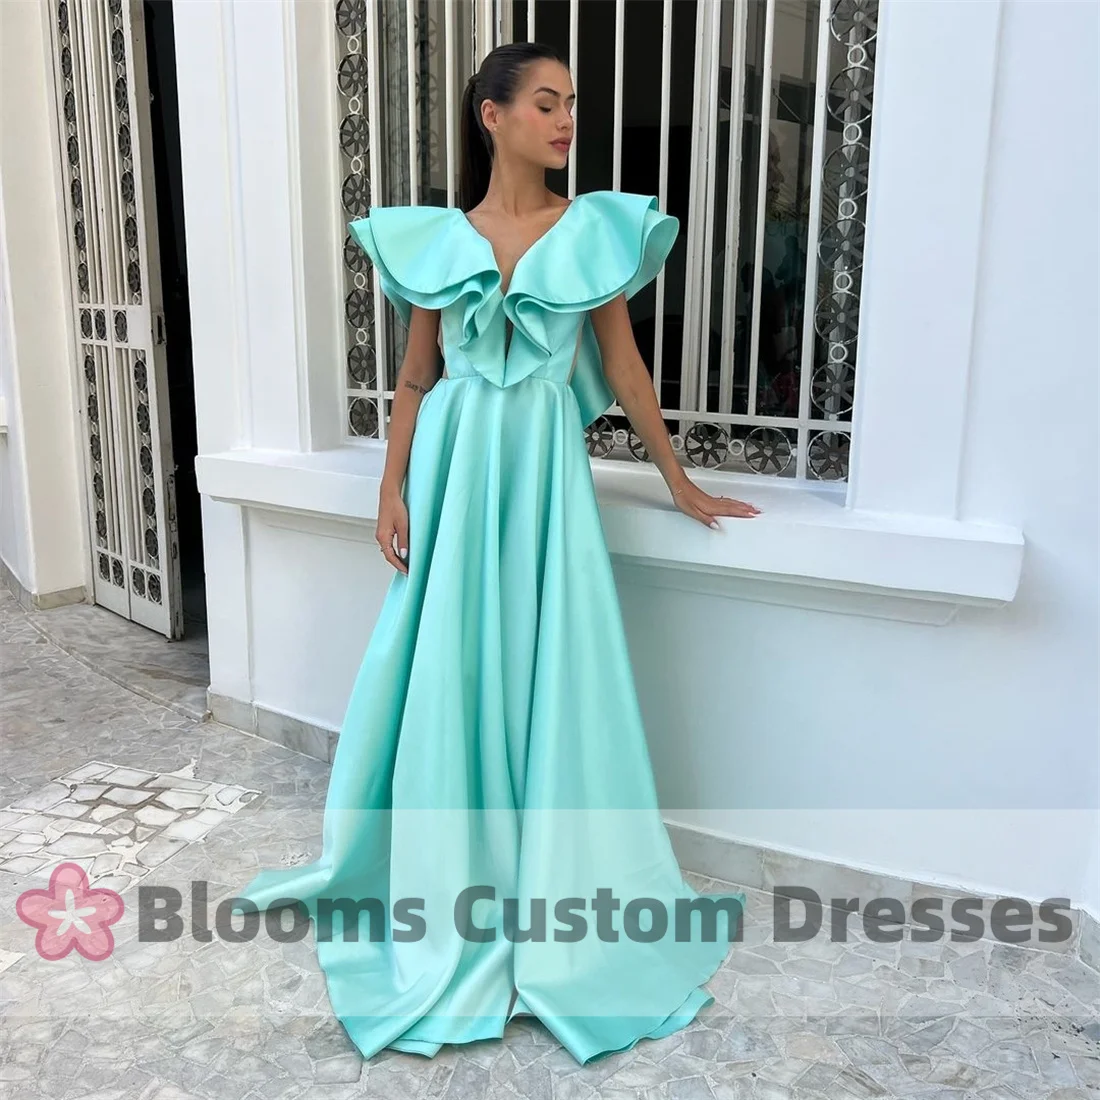 

Blooms A-line Mint Green Backless Prom Dresses V-neck Elegant Satin Sleeveless Evening Dress 2024 Draped Formal Party Gown